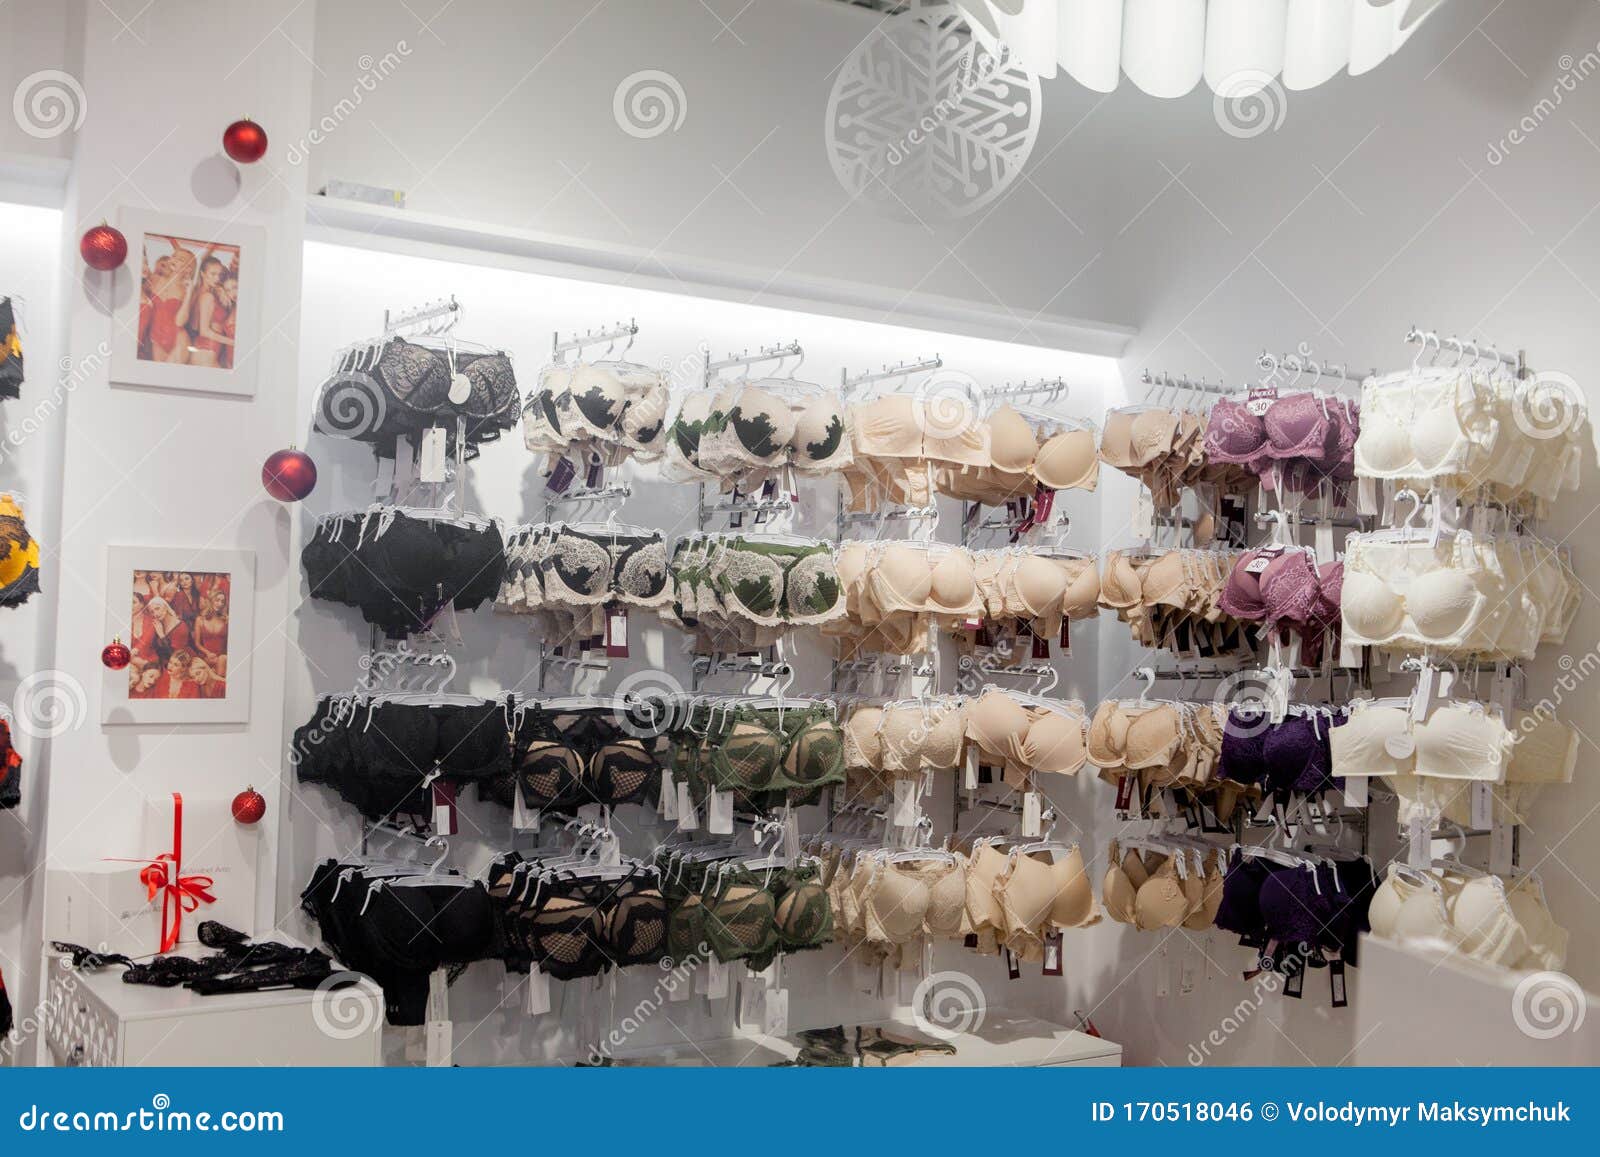 Various Type Of Women Lingerie Or Underwear Shop Editorial Photography  Image Of Consumer, Happiness: 97924387